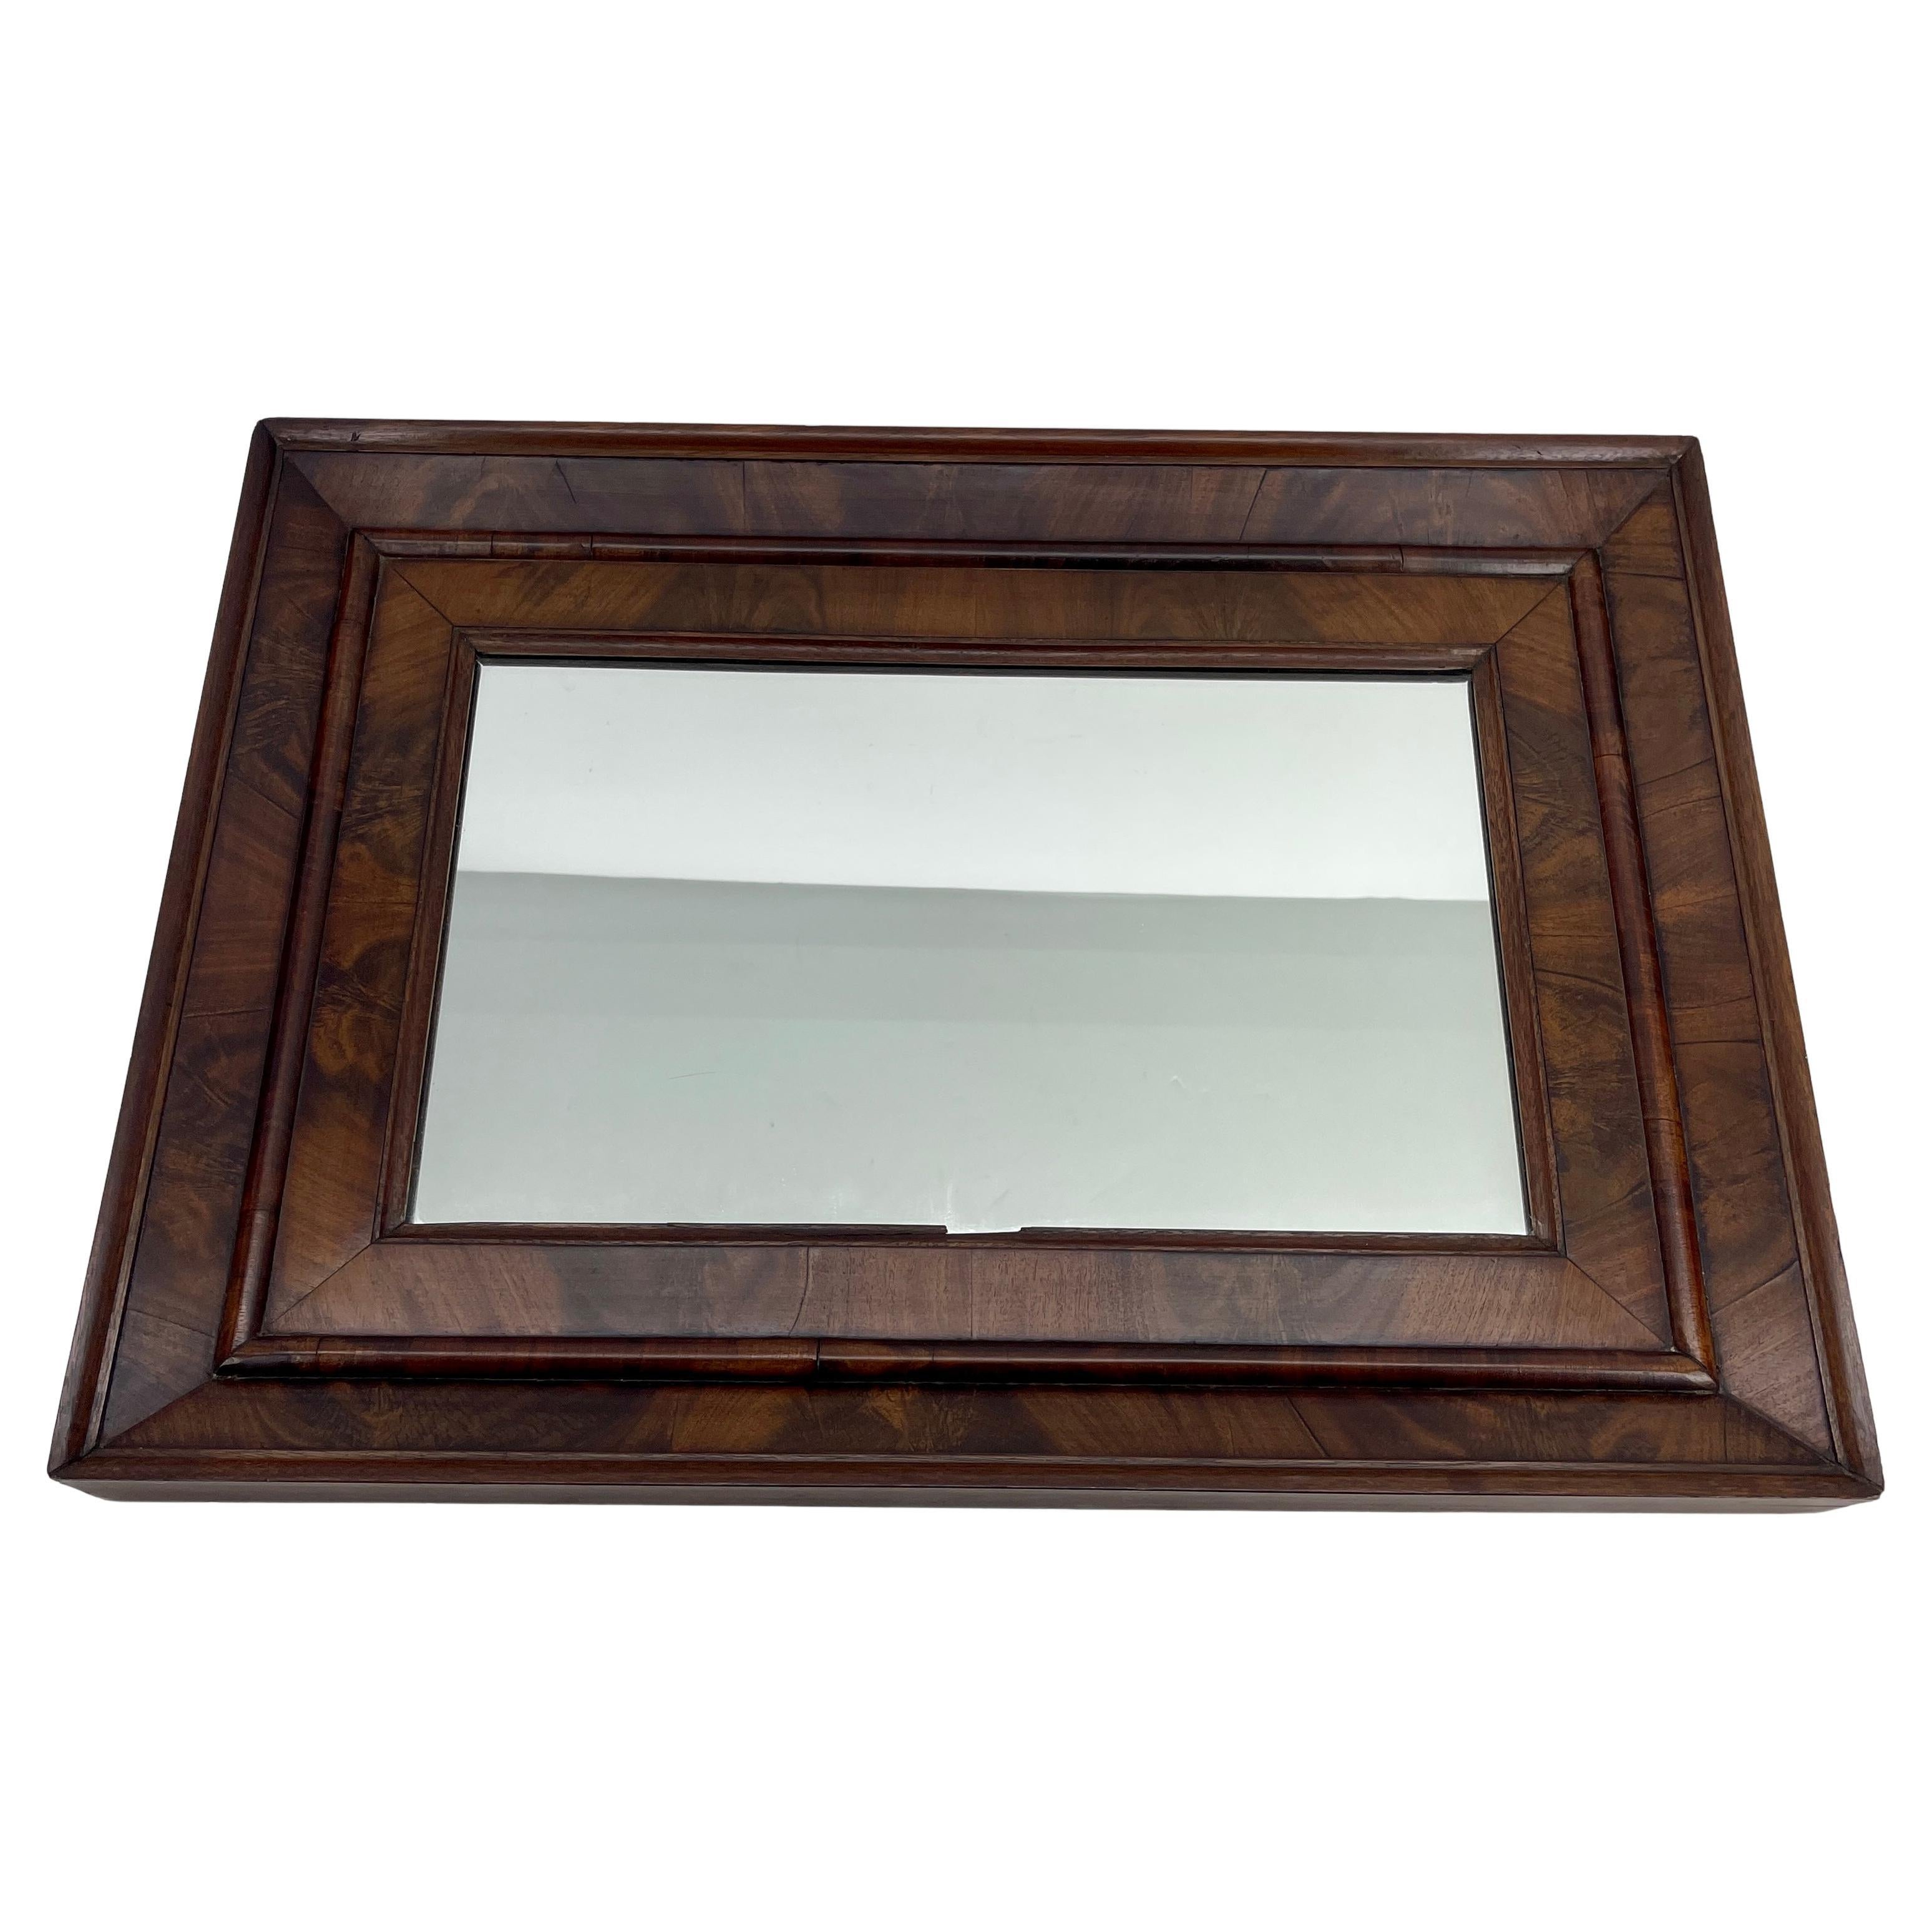 Hand-Crafted 19th Century Flaming Mahogany Veneer Rectangular Mirror, American, 1880 For Sale